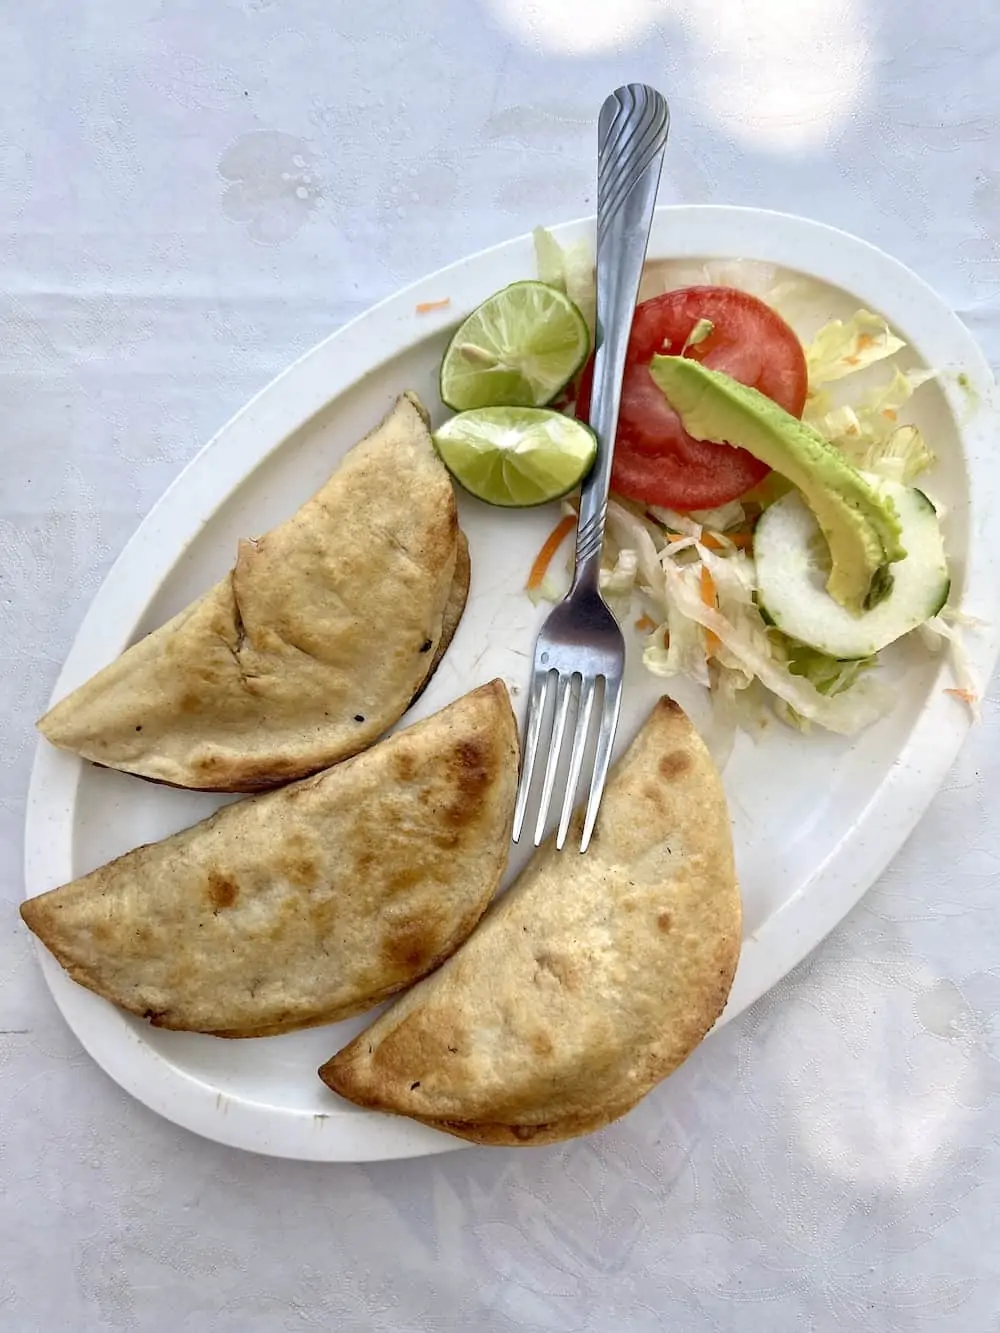 Plate of Oaxacan pescadillas with salad. 